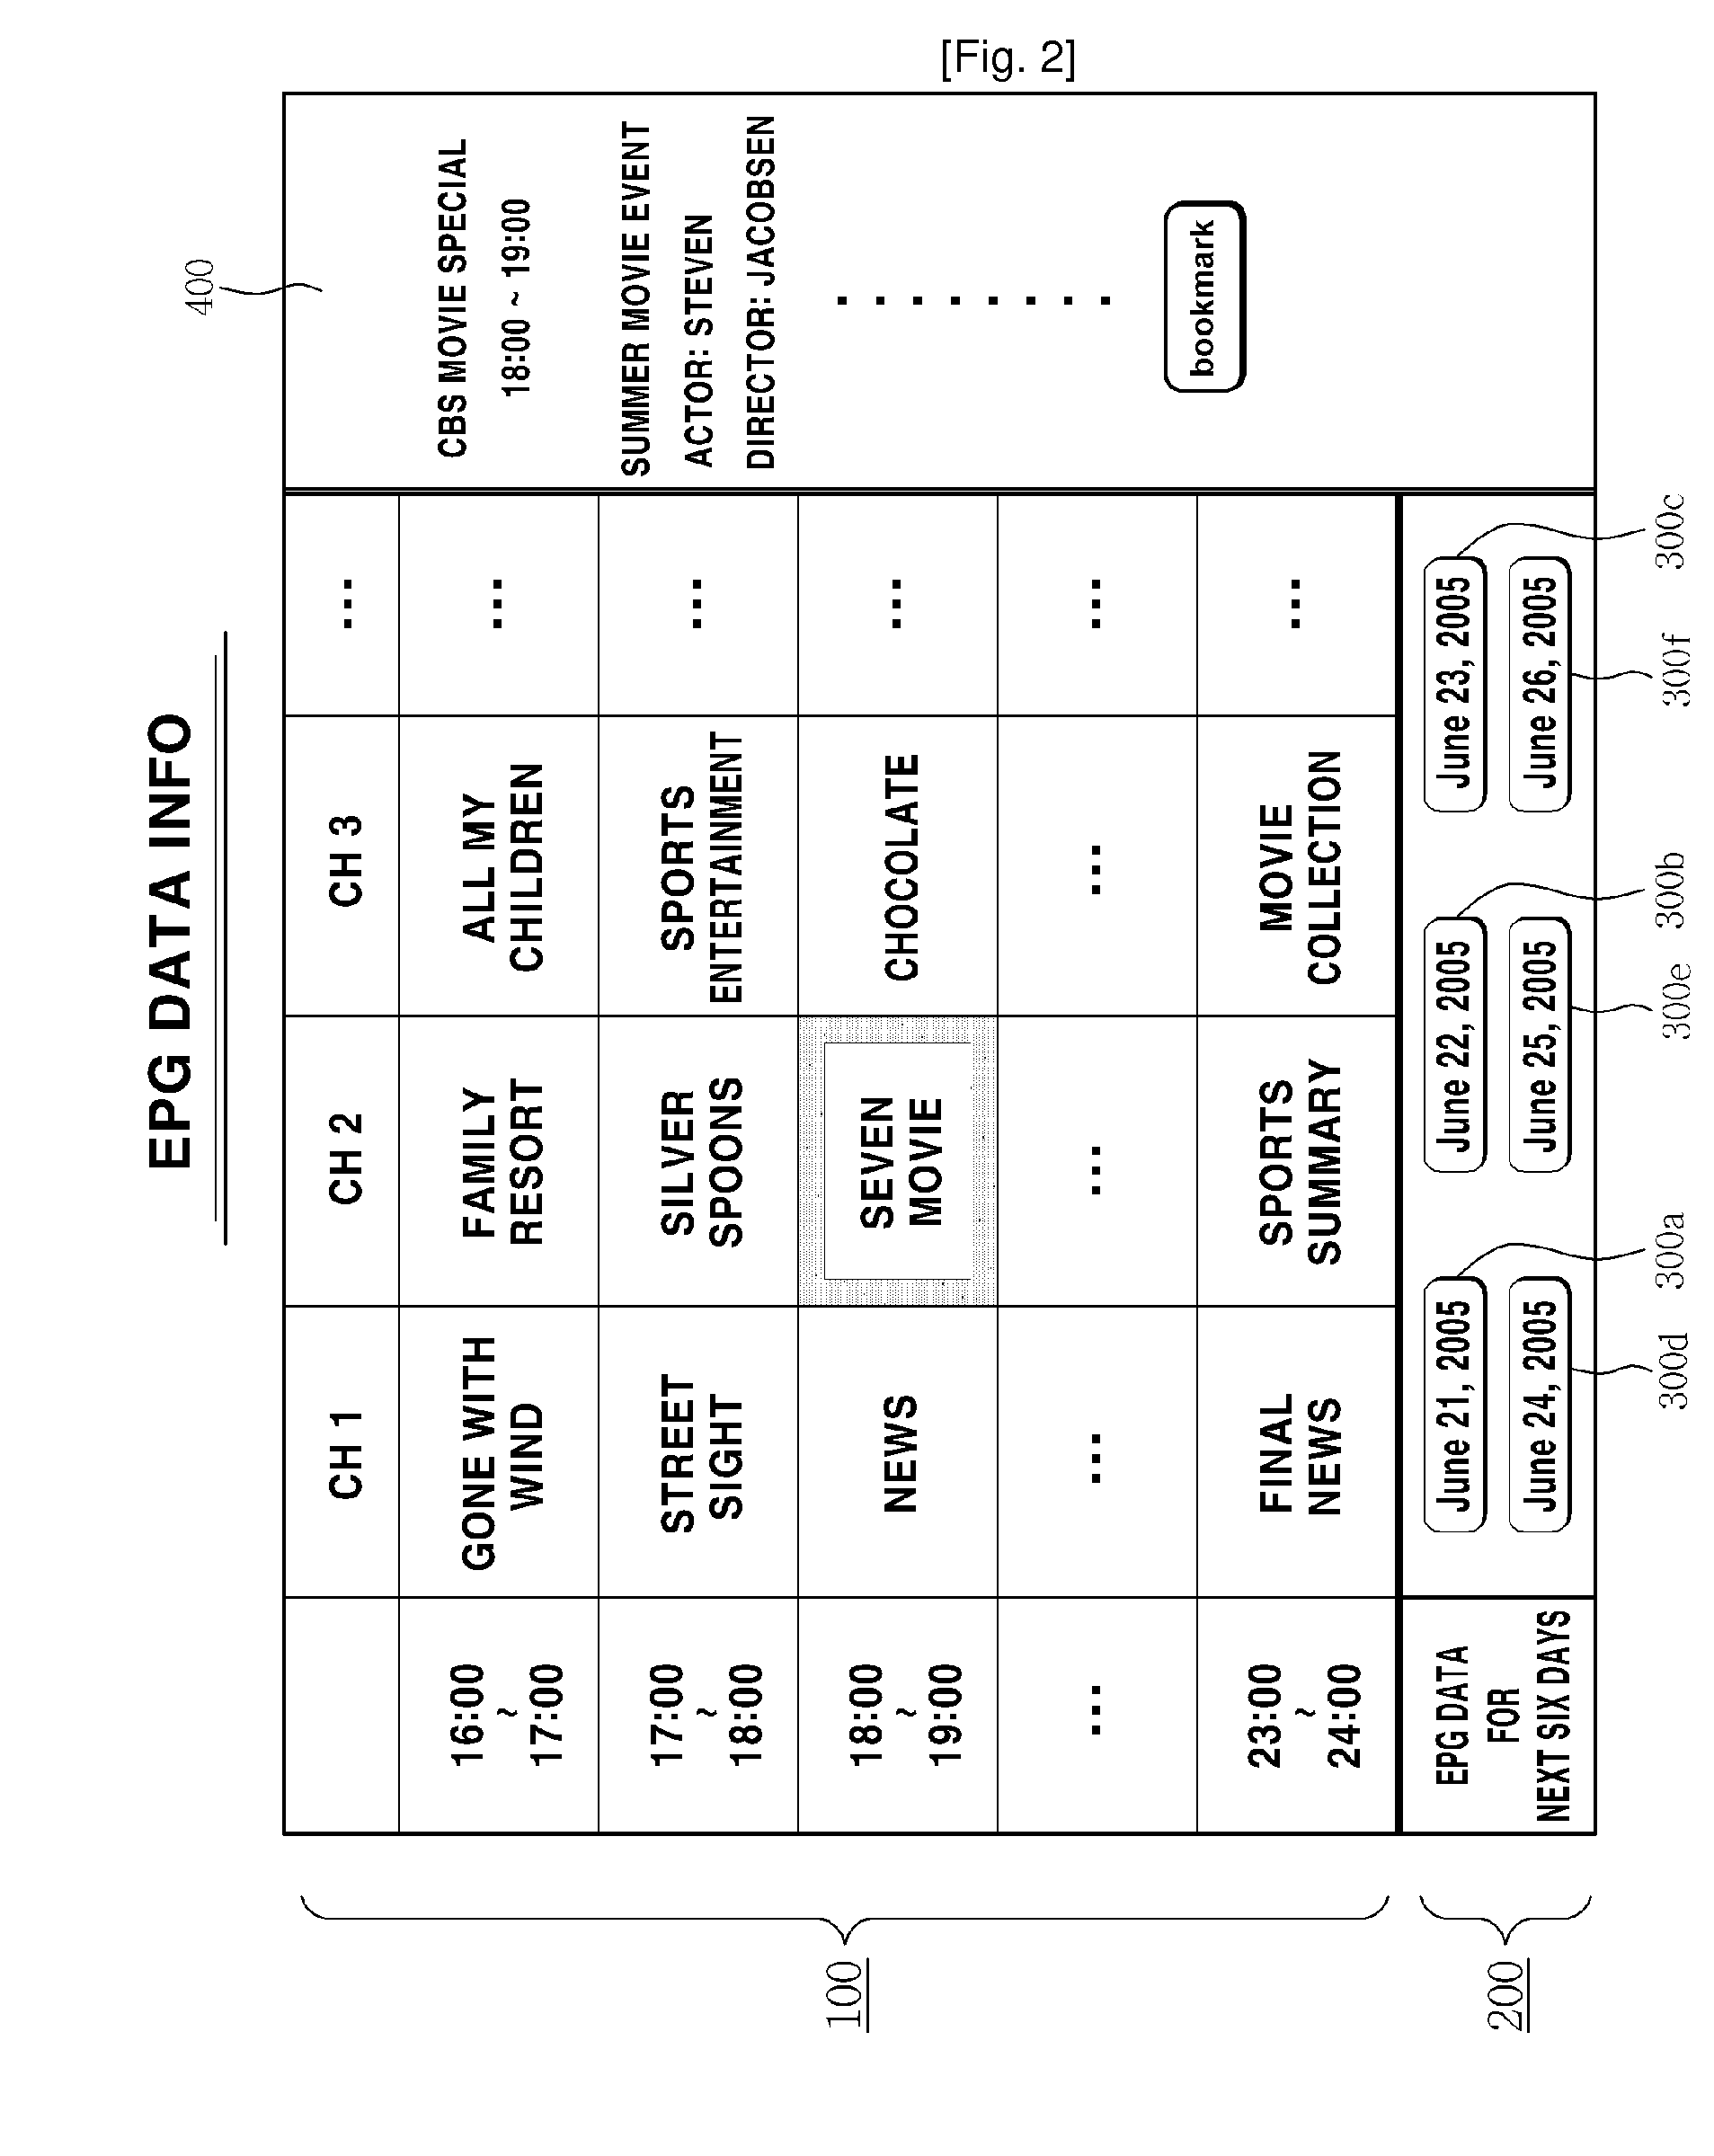 System and Method for the Construction of Electronic Program Guide Through Cooperative Transmission of Electronic Program Guide Data